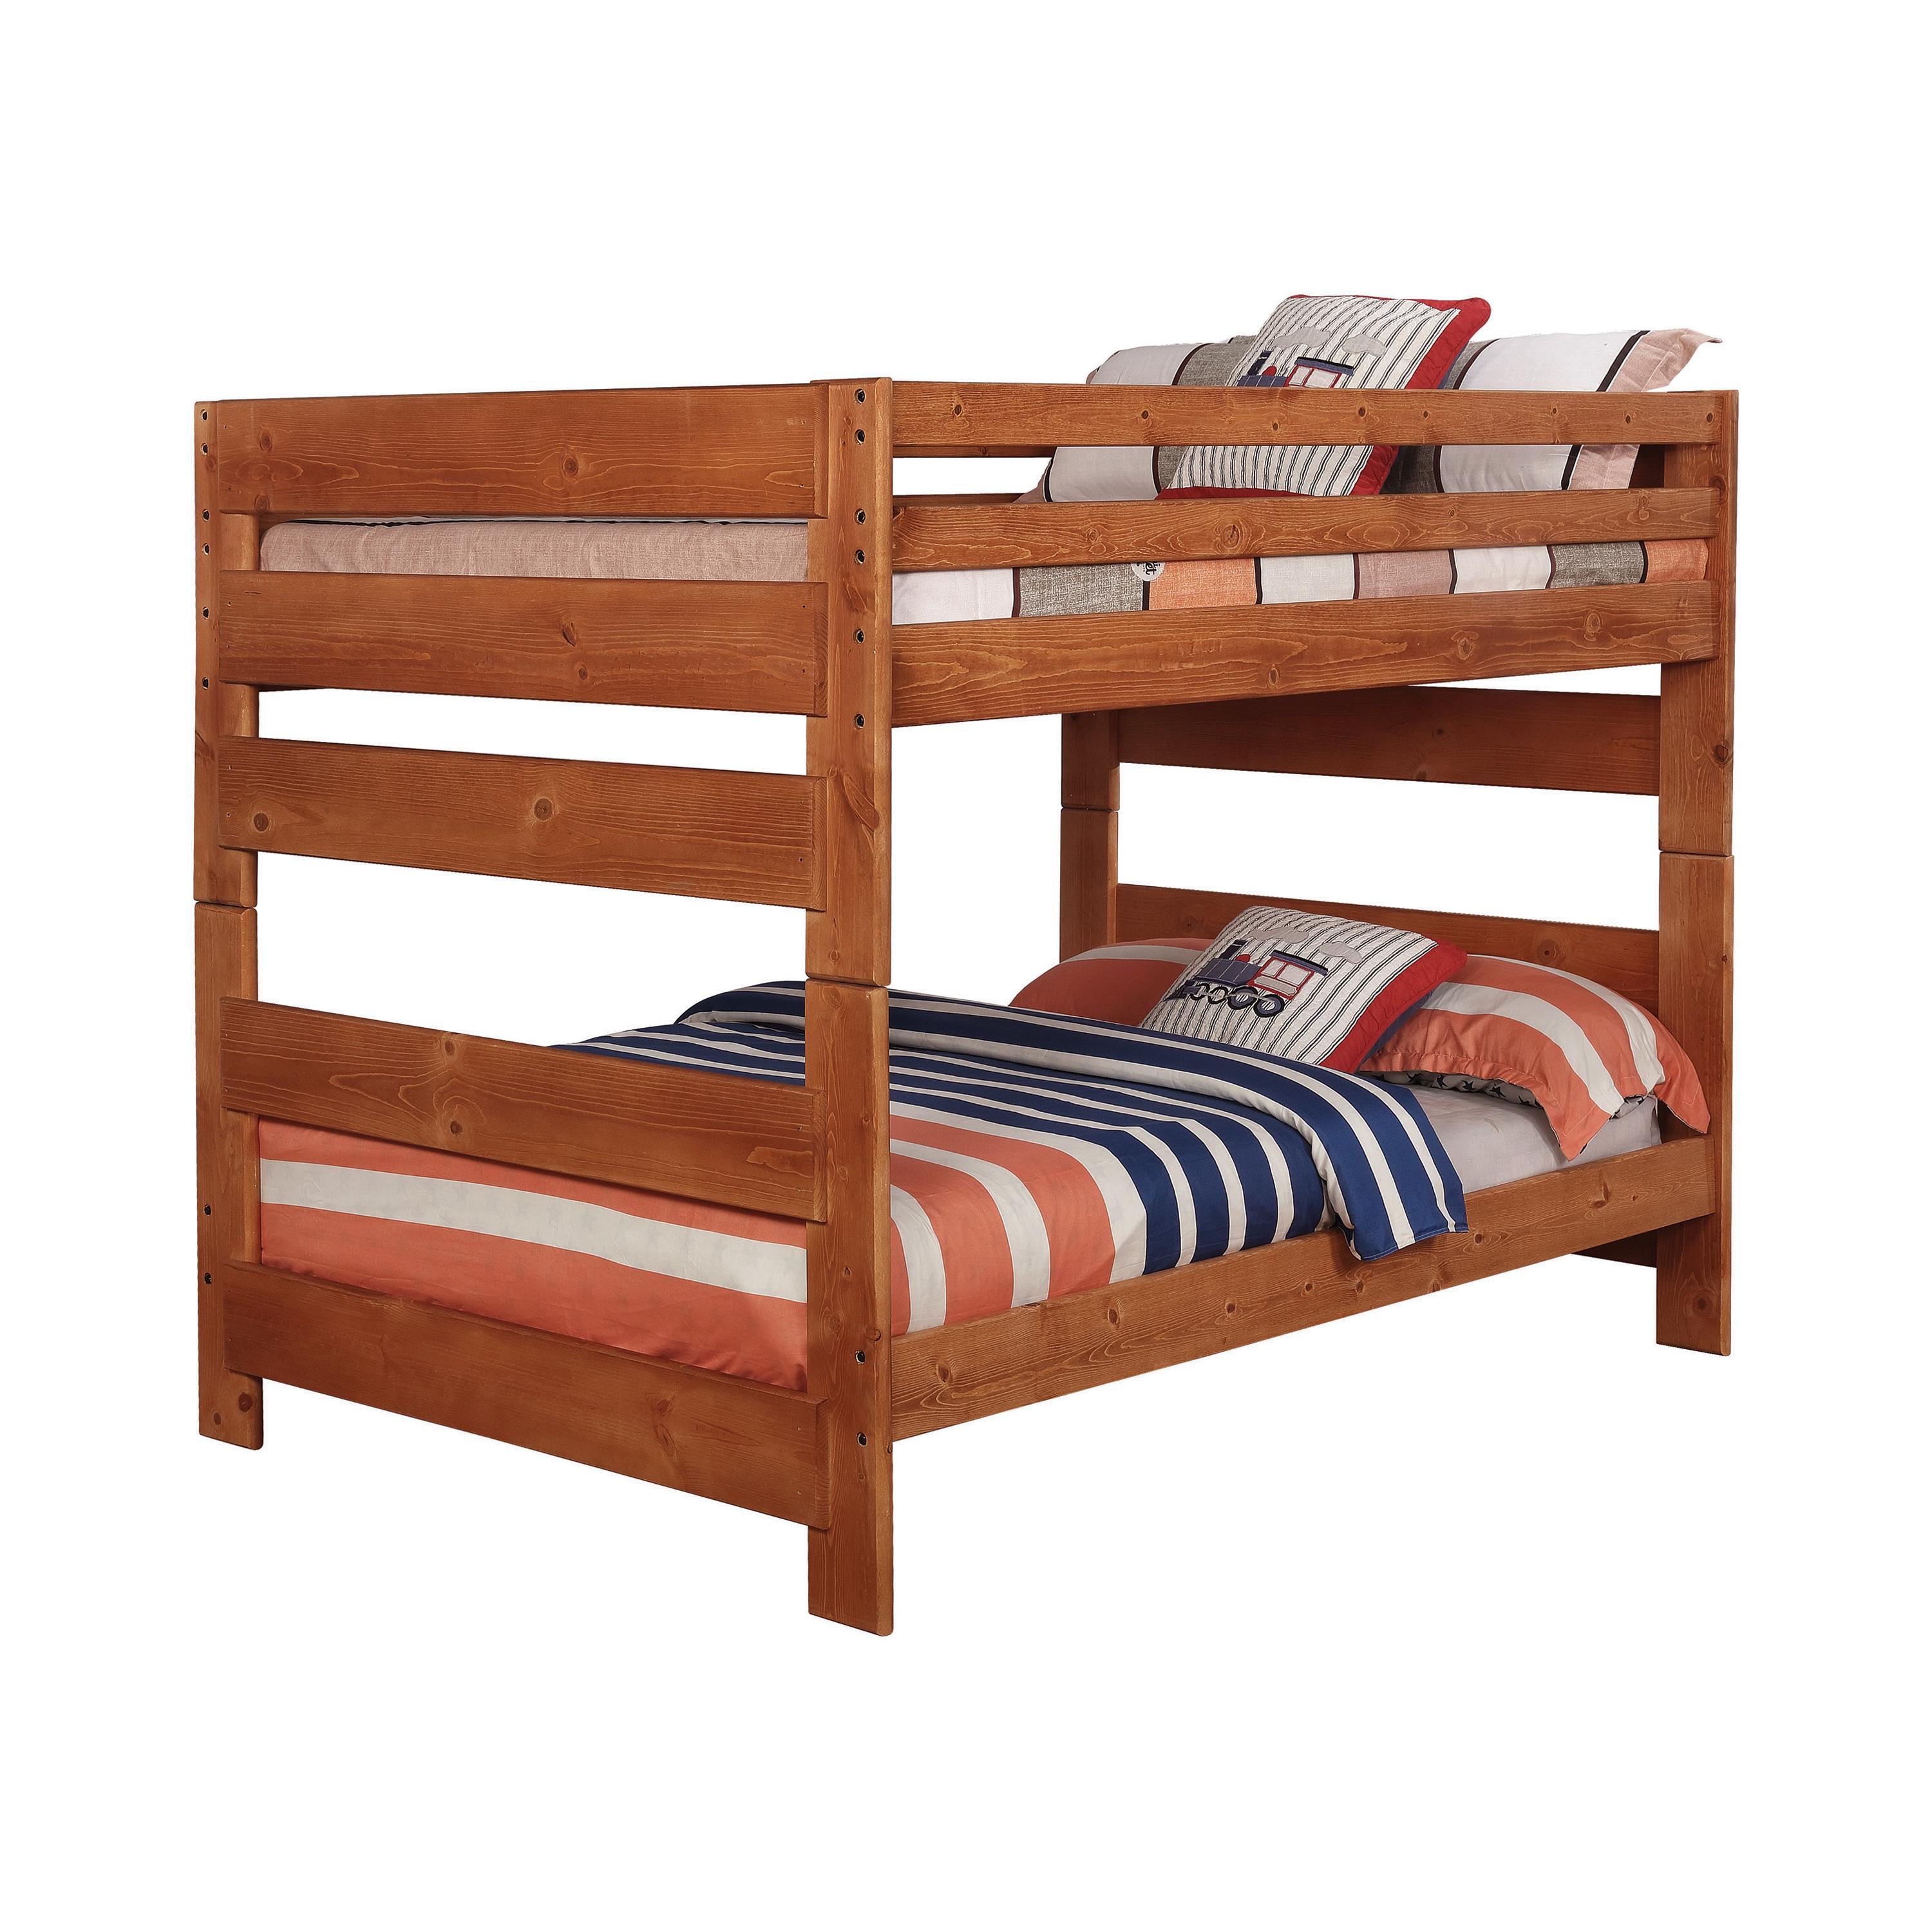 Transitional Bunk Bed 460096 Wrangle Hill 460096 in Amber 